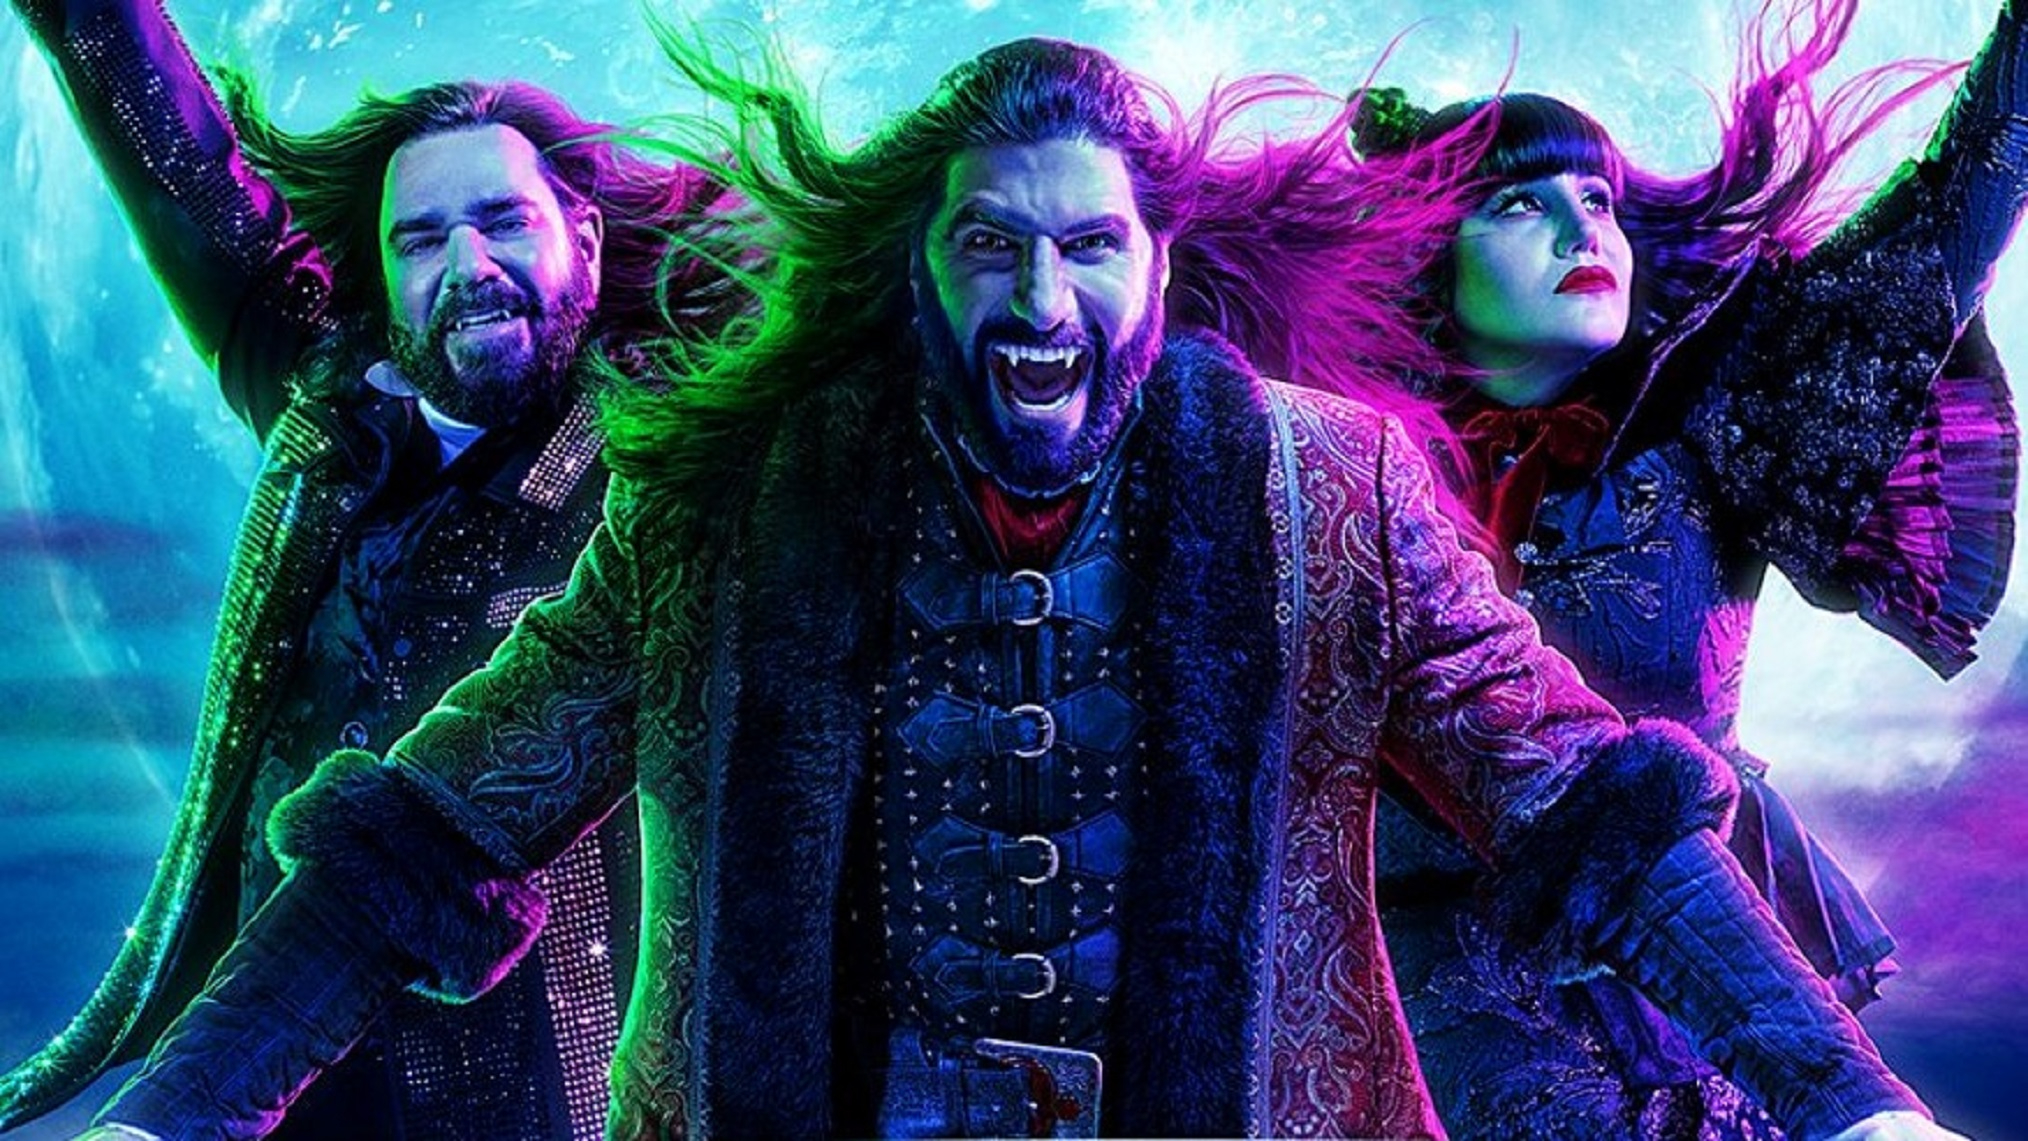 what we do in the shadows season 4